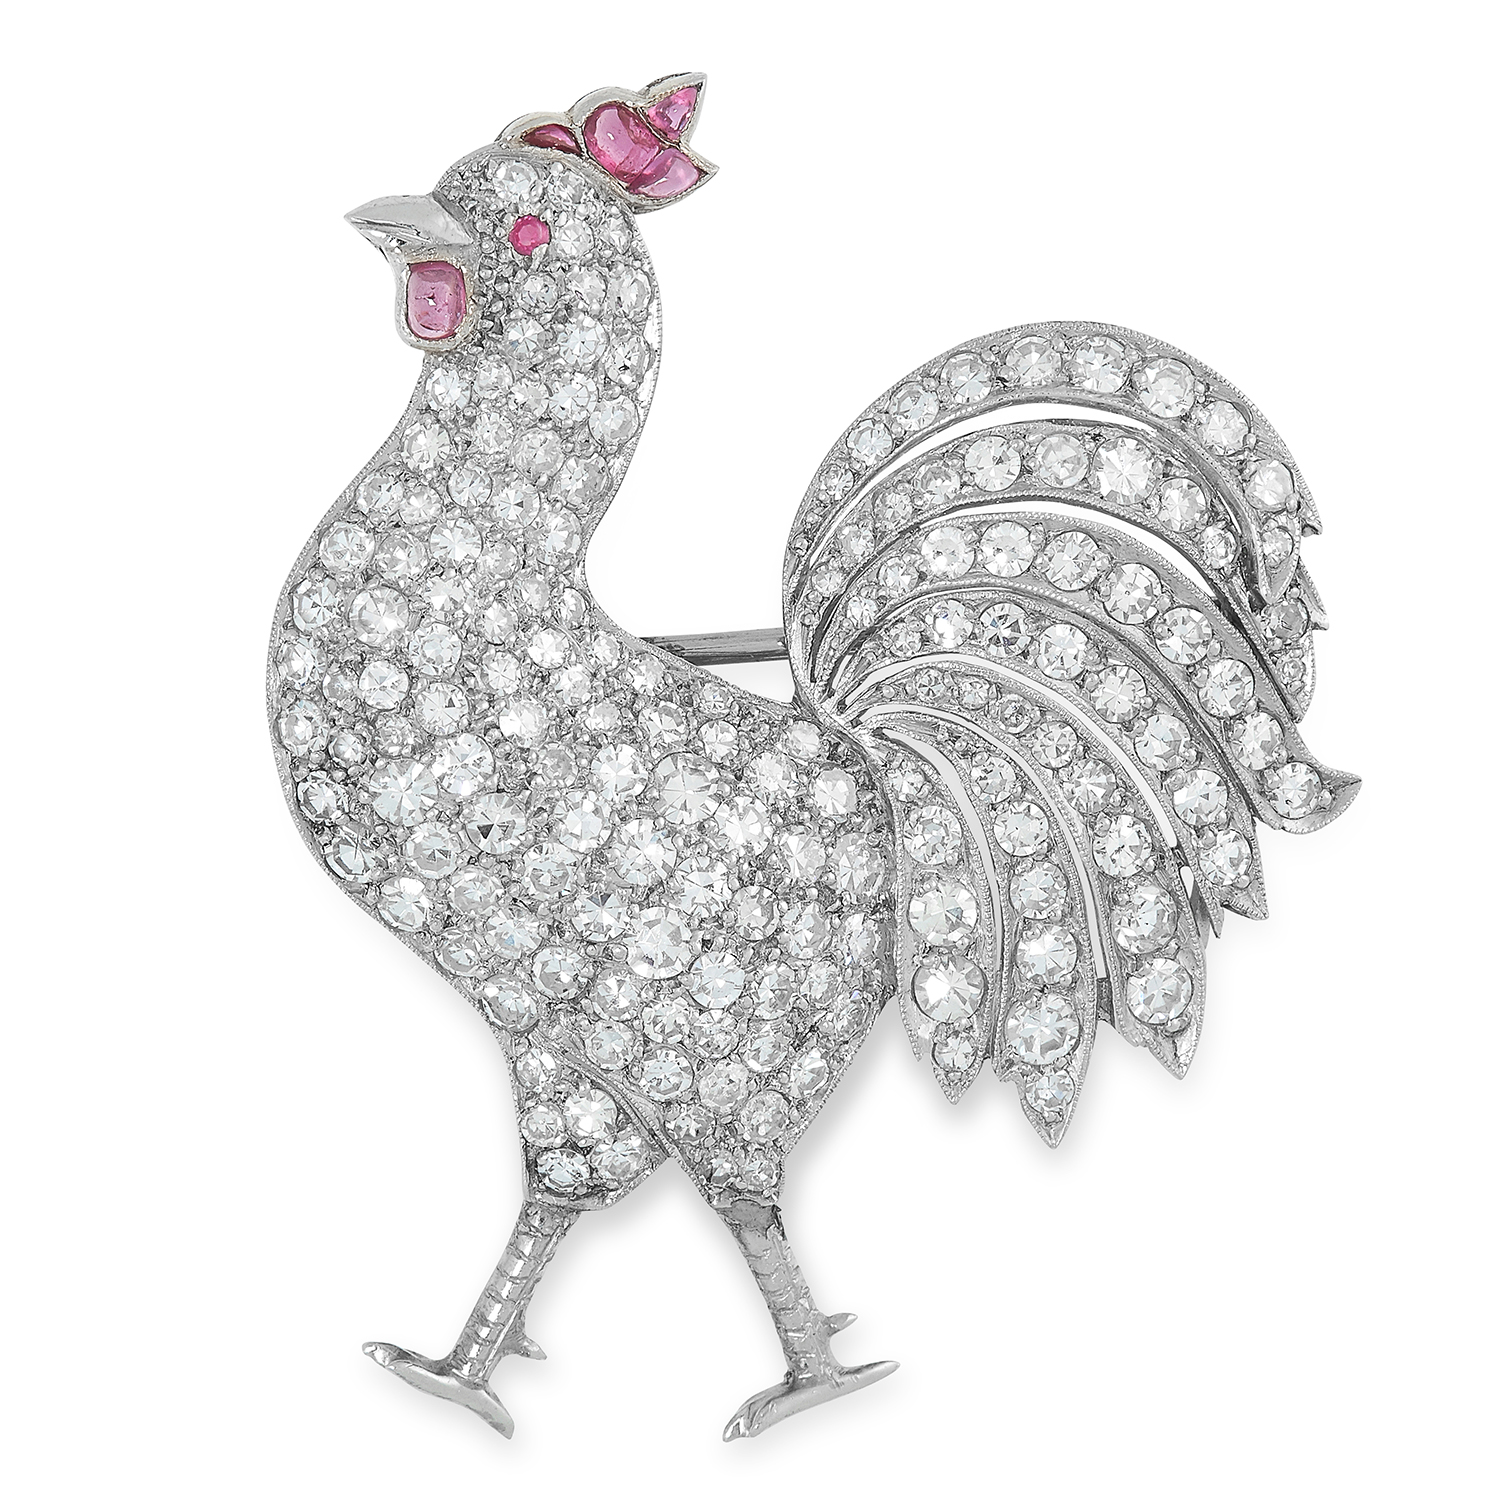 AN ANTIQUE DIAMOND AND RUBY COCKEREL BROOCH the body jewelled with single cut diamonds totalling